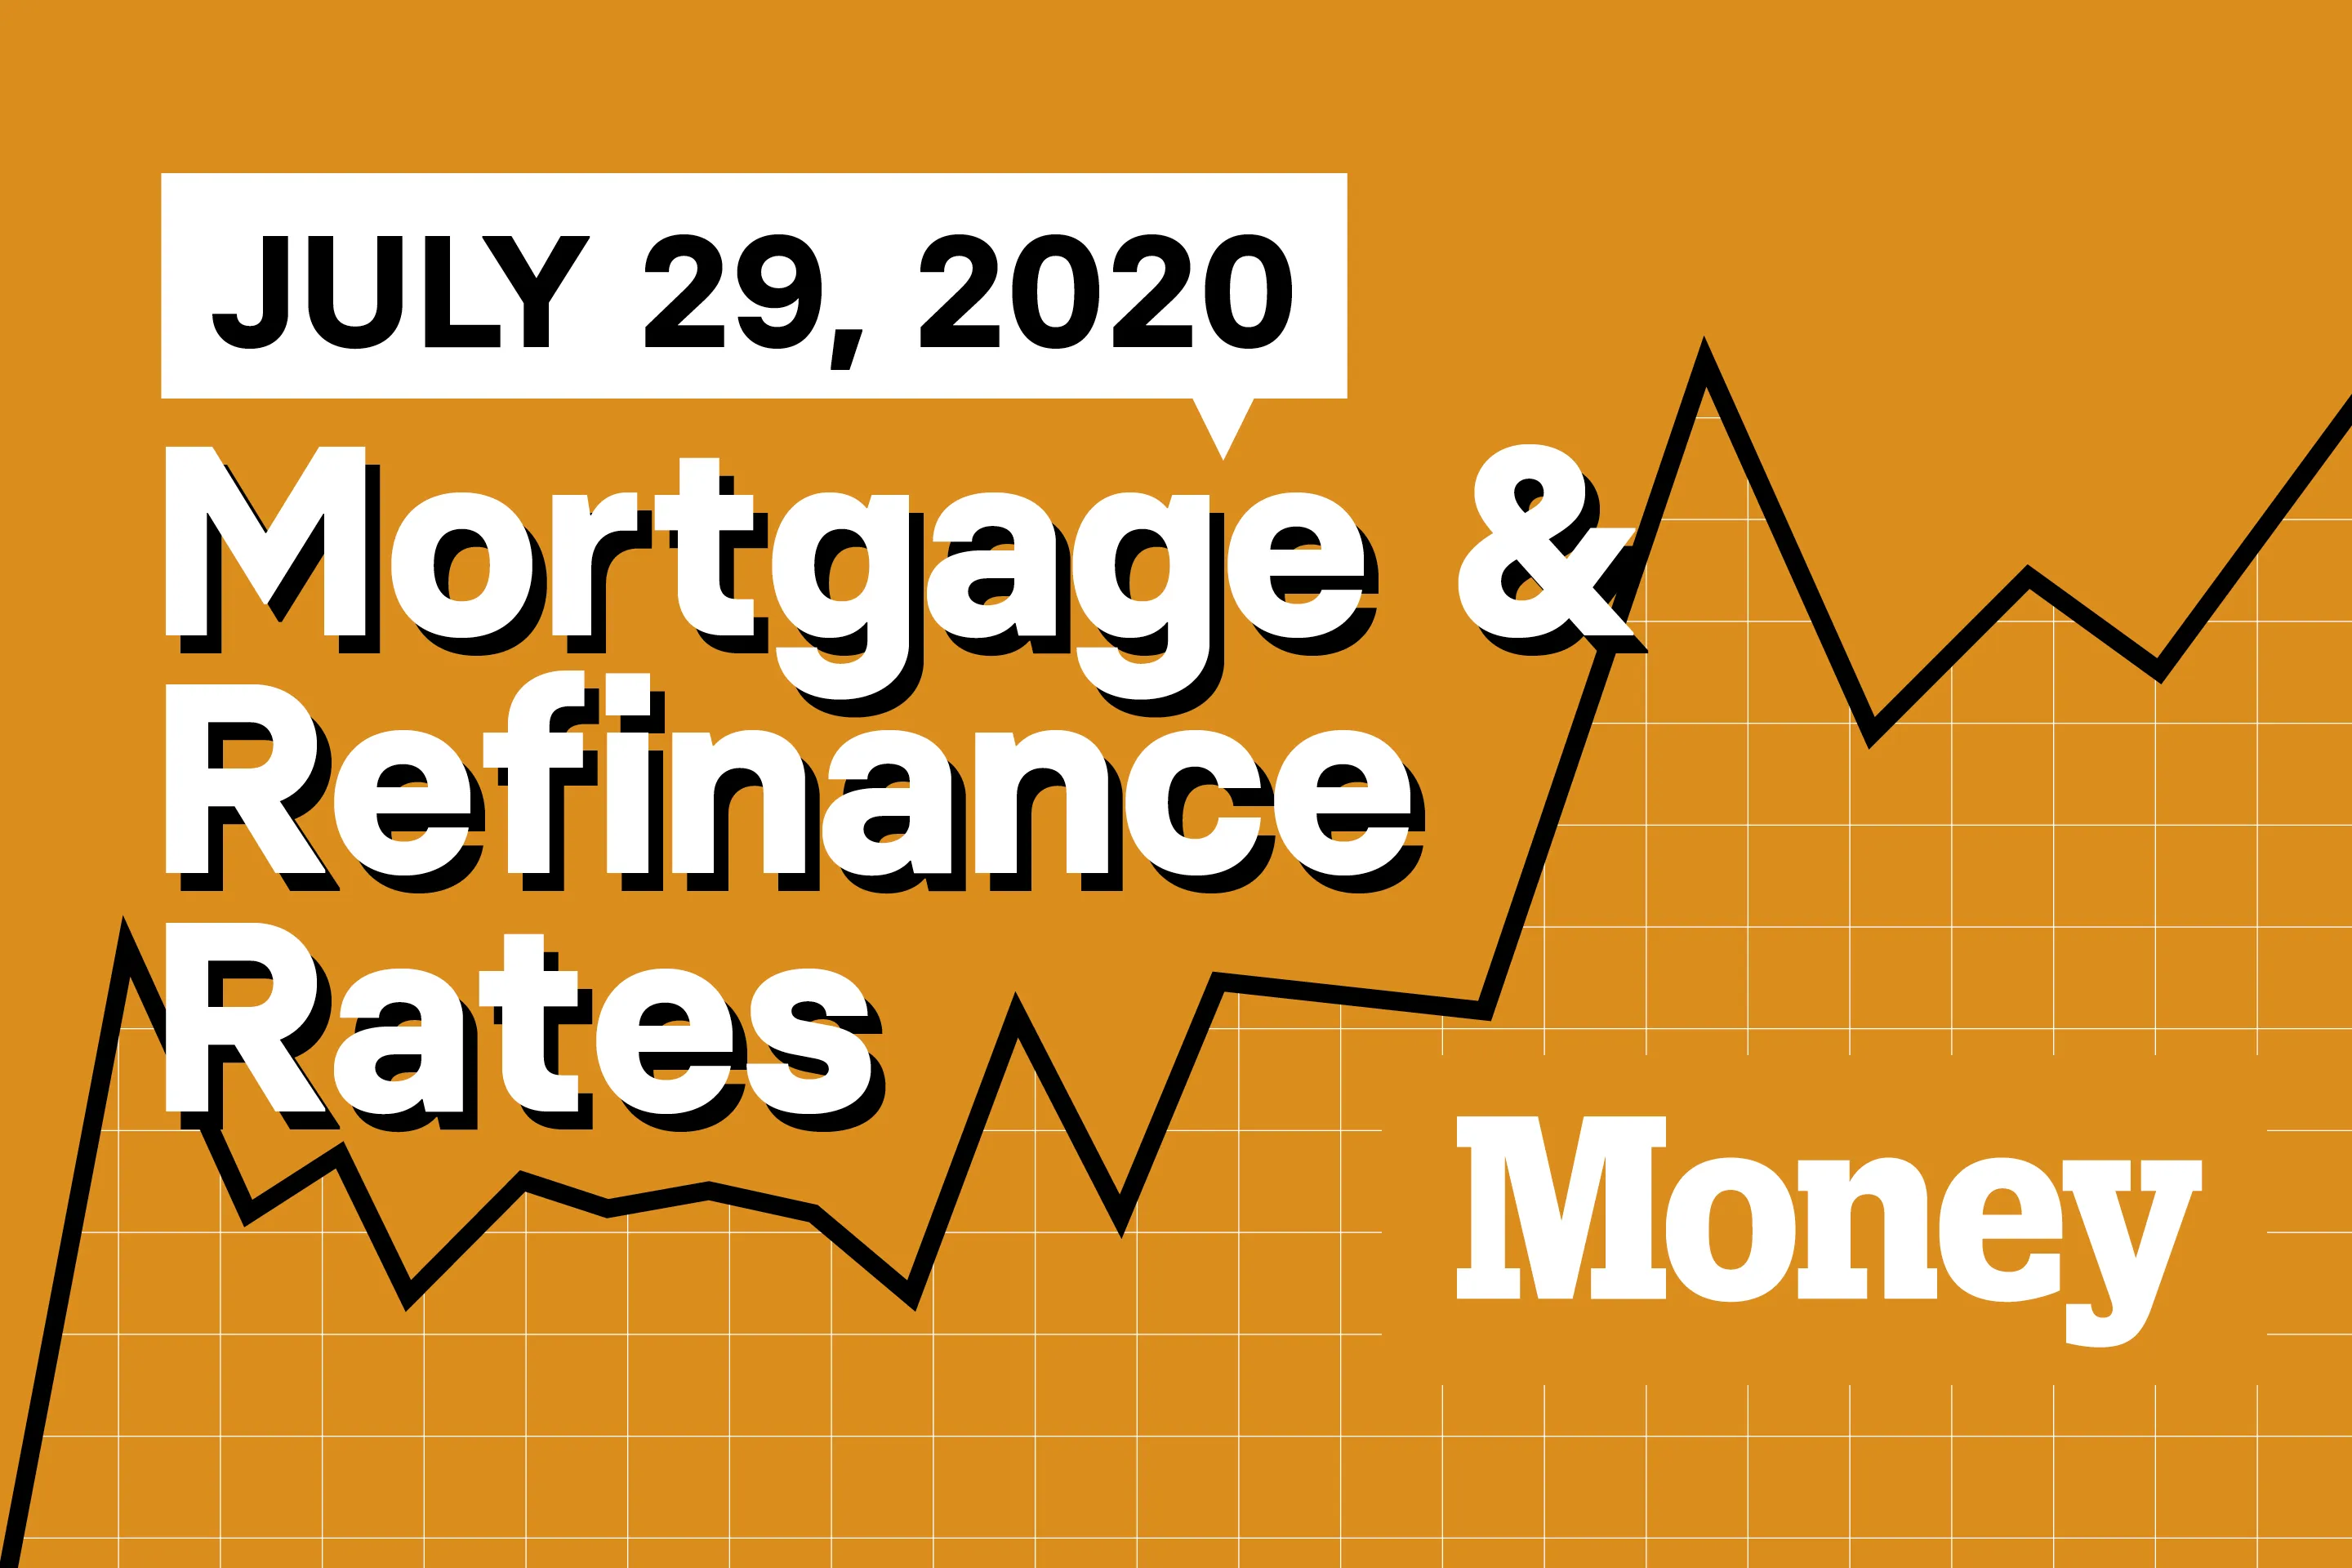 Here Are Today's Best Mortgage & Refinance Rates for July 29, 2020